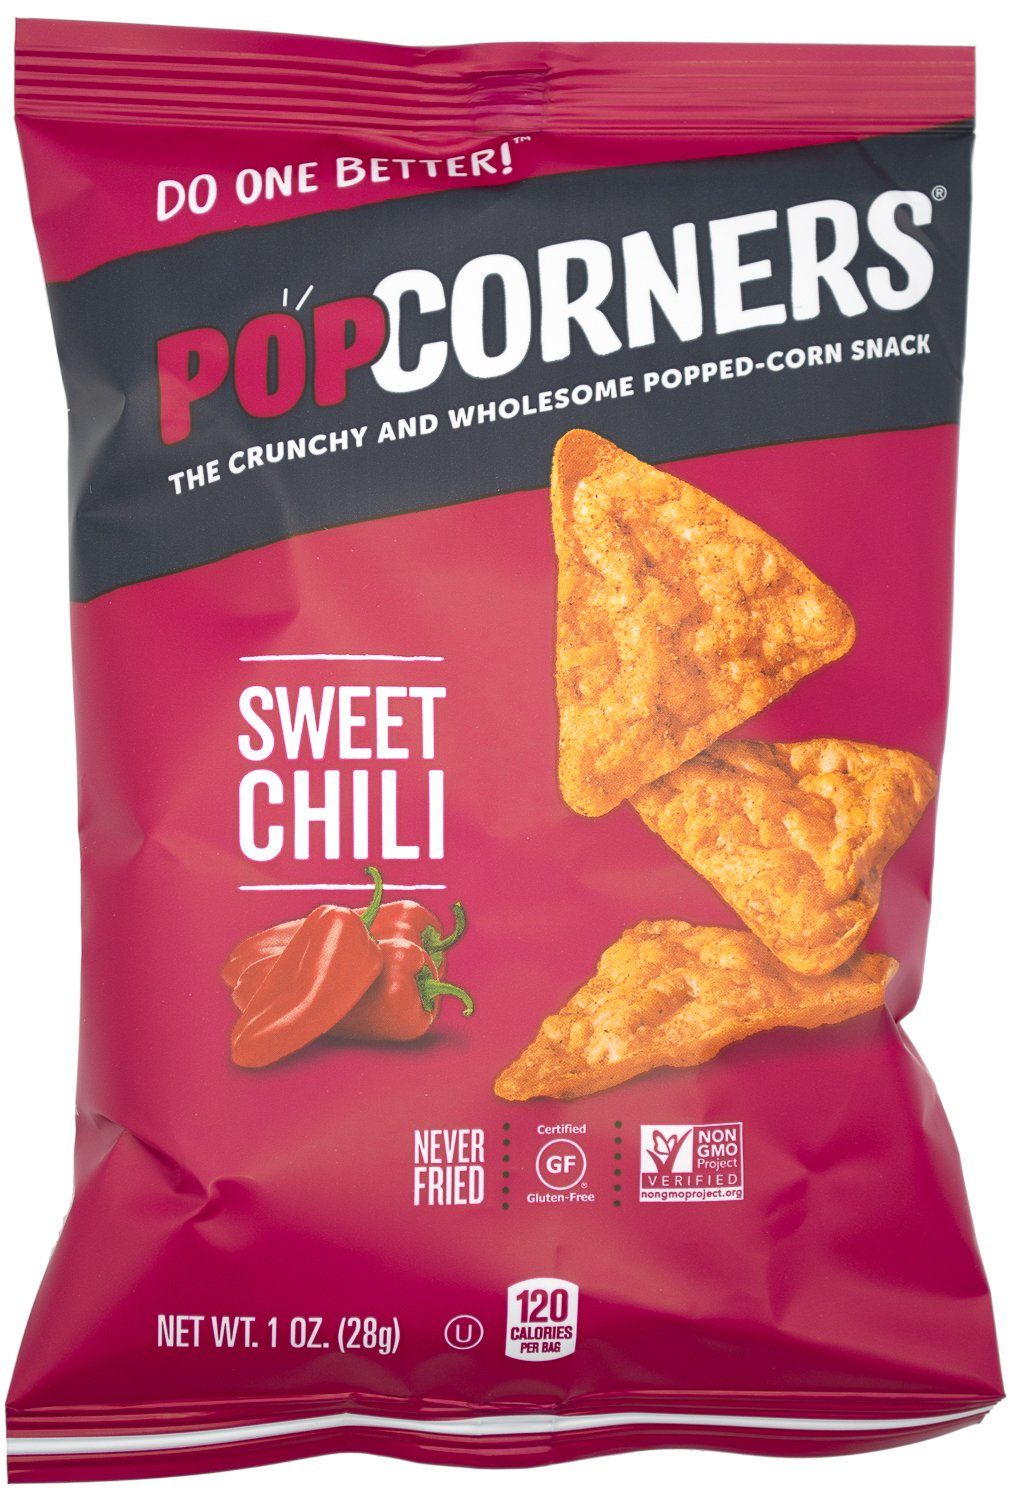 Popcorners - The Crunchy and Wholesome Popped-corn Snack Popcorners Sweet Chili 1 Ounce 